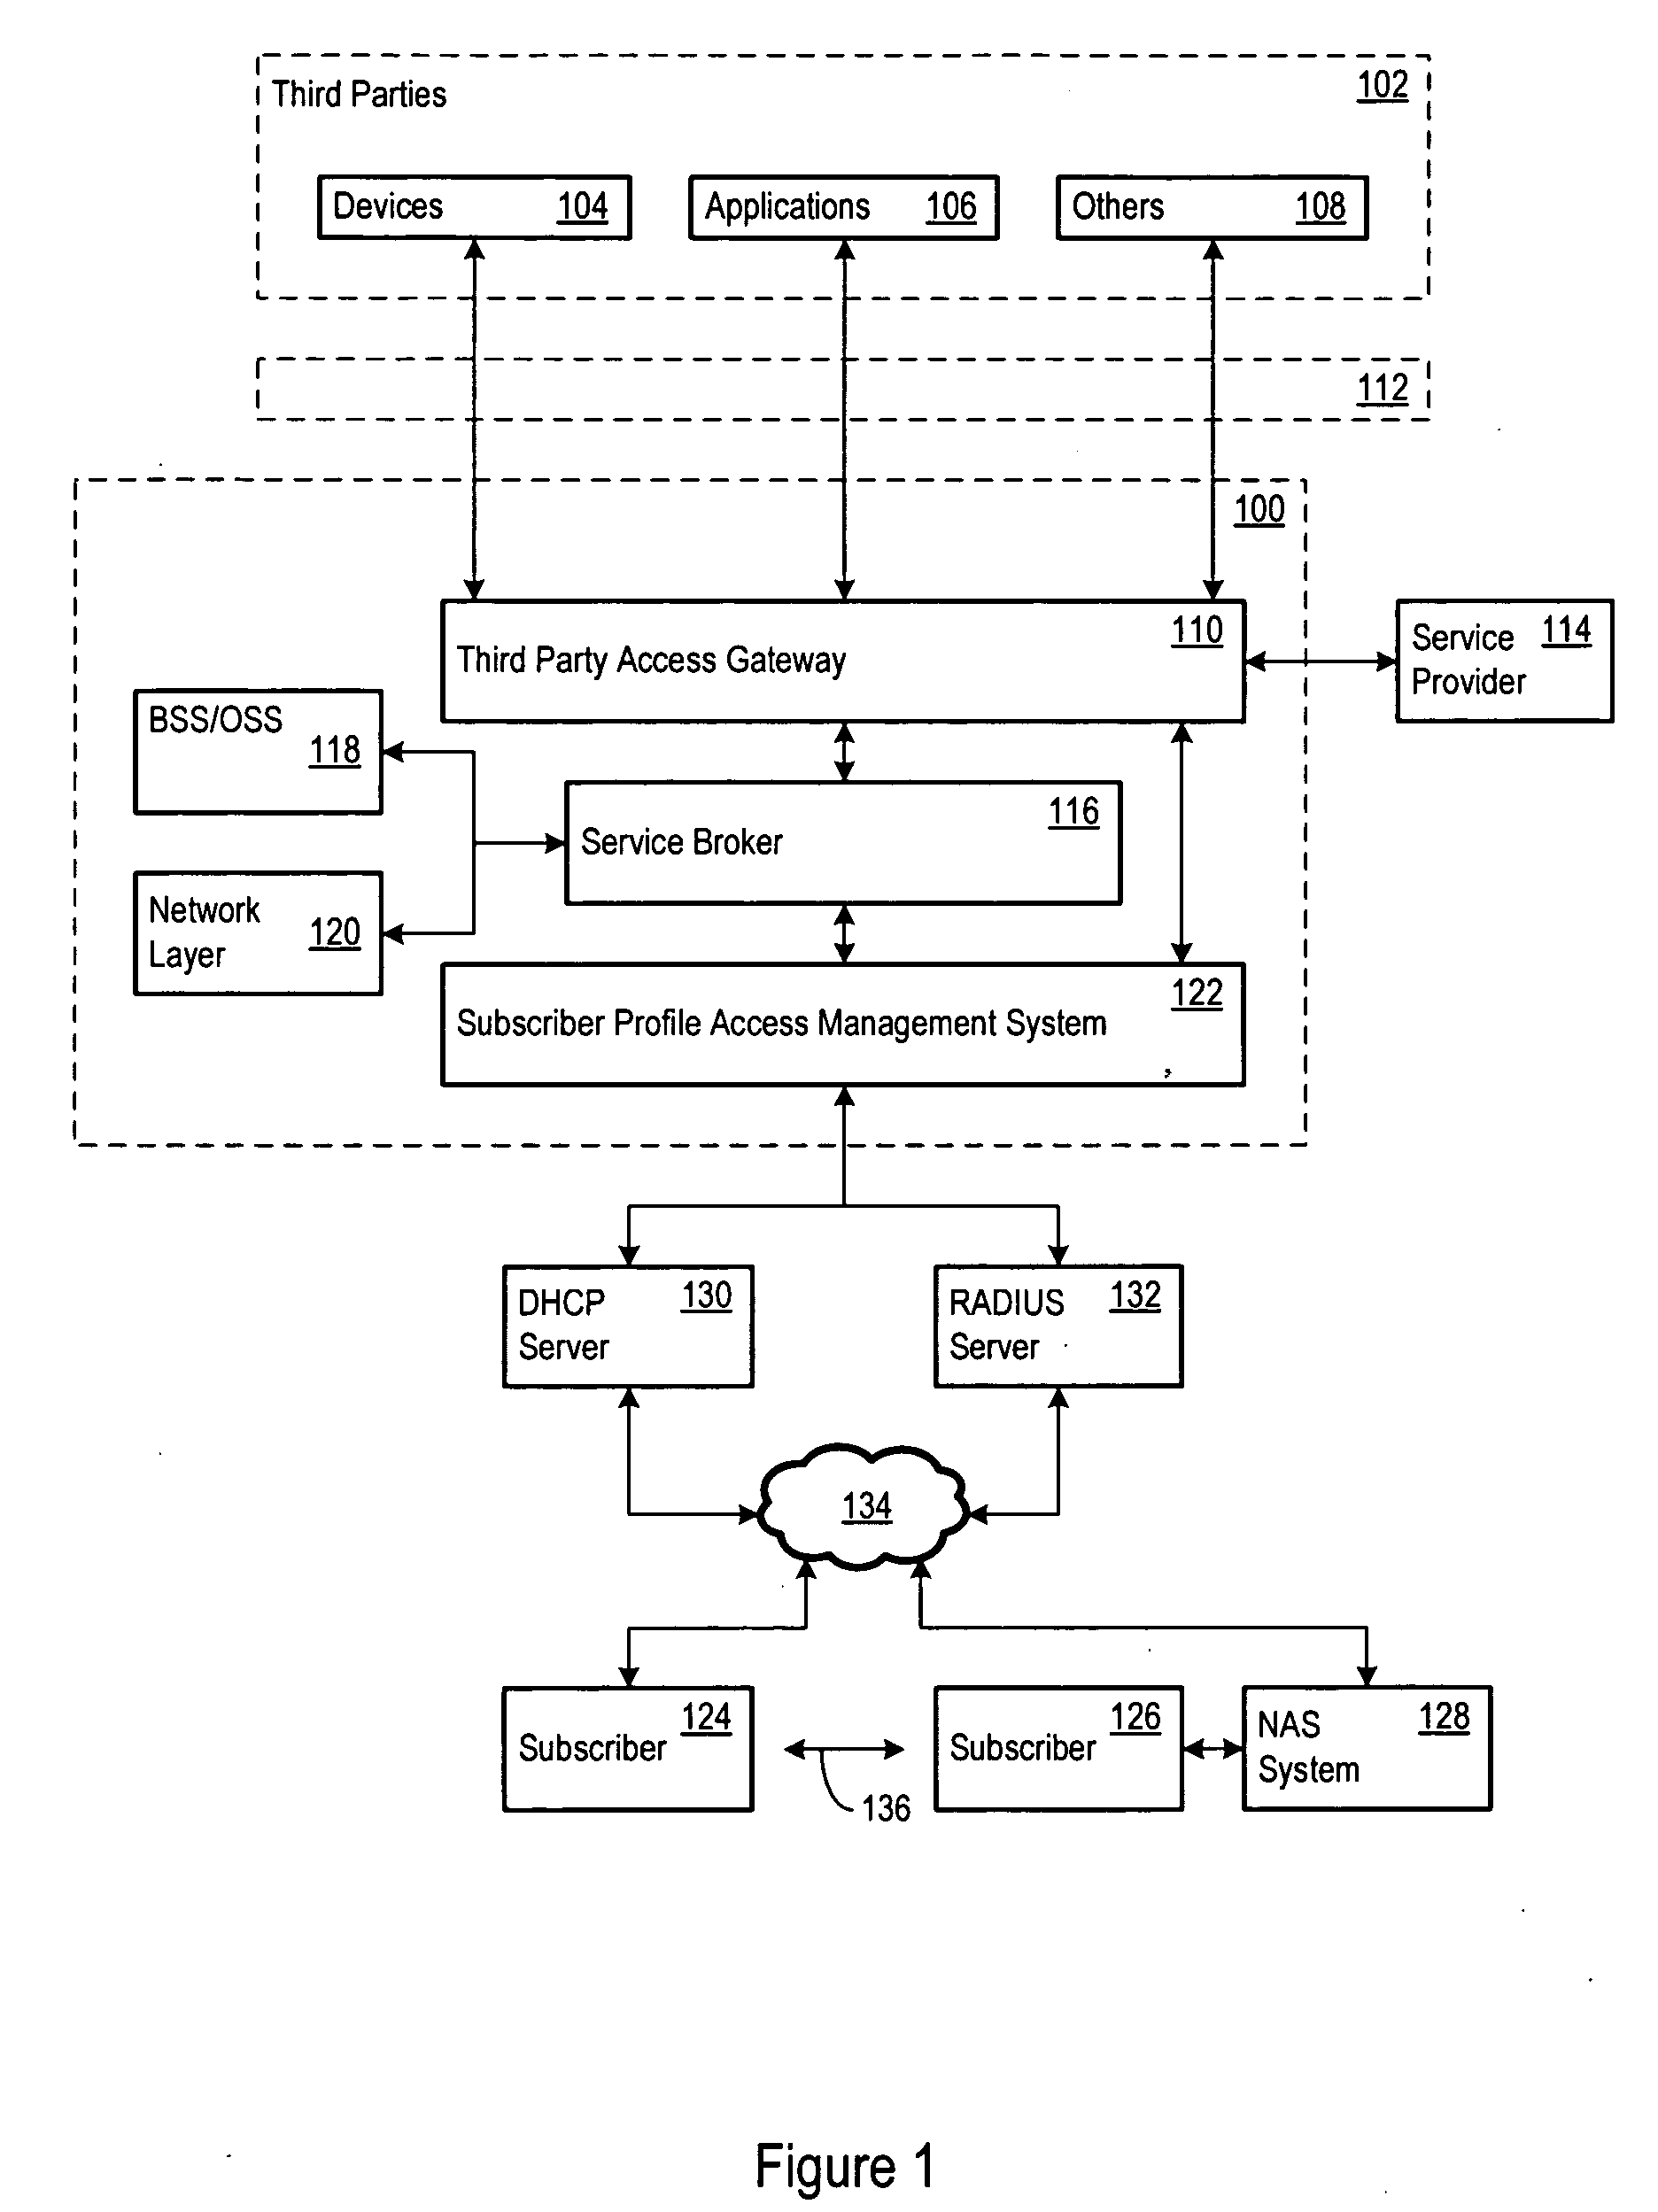 Unified directory system including a data model for managing access to telecommunications services